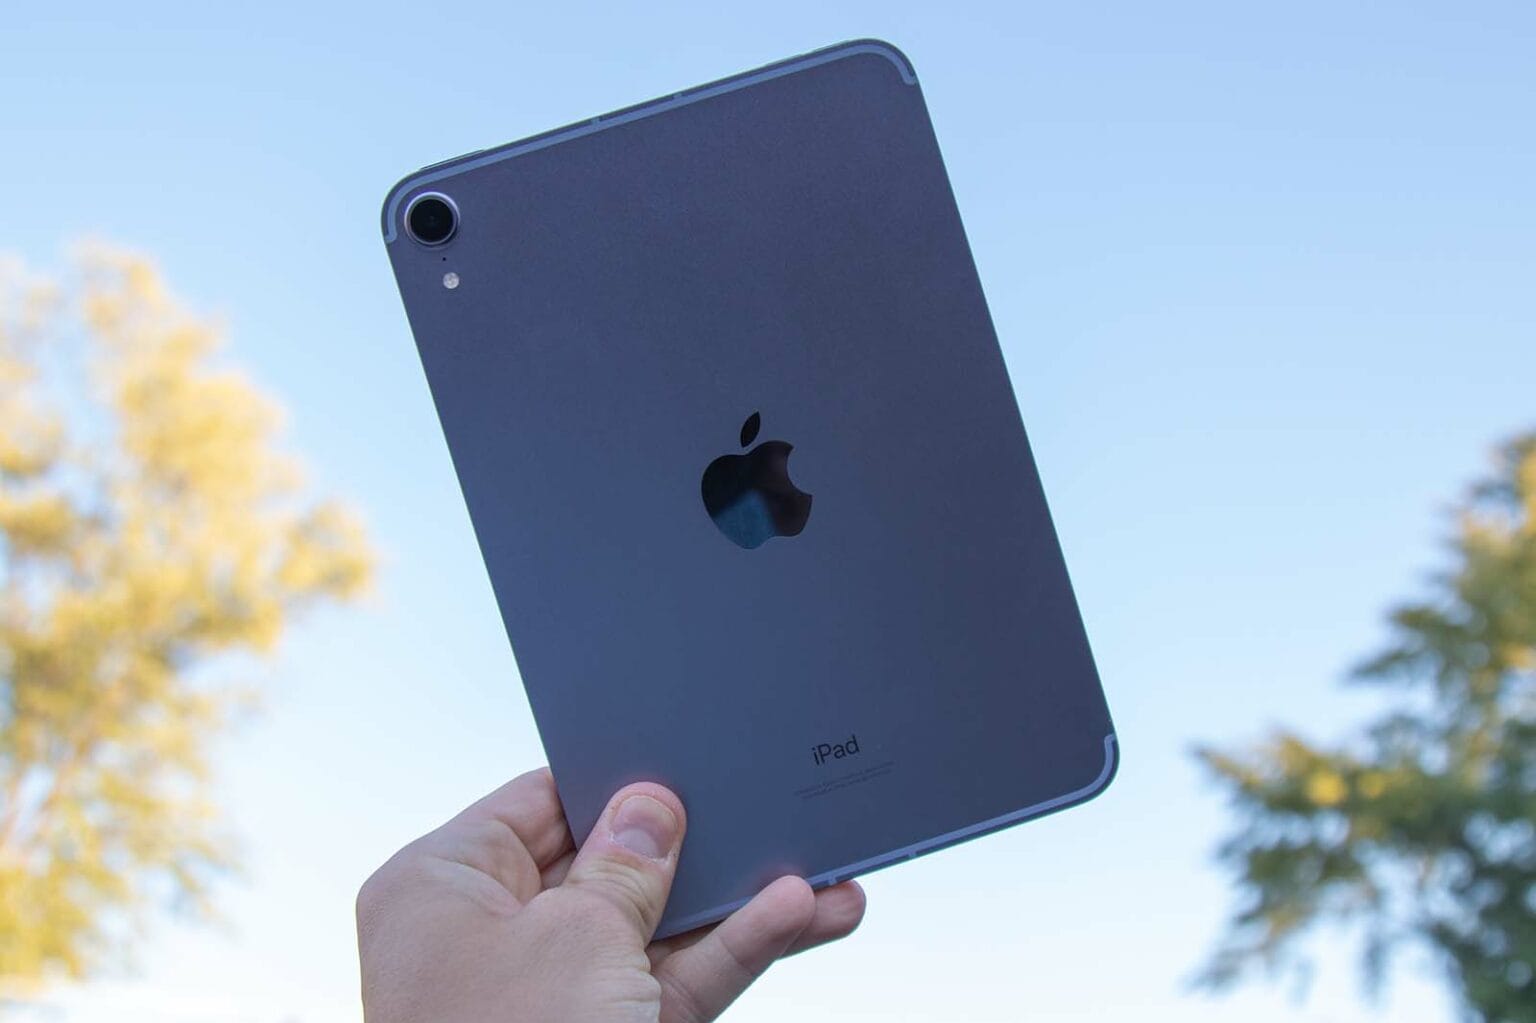 iPad mini in hand, held up to the sky